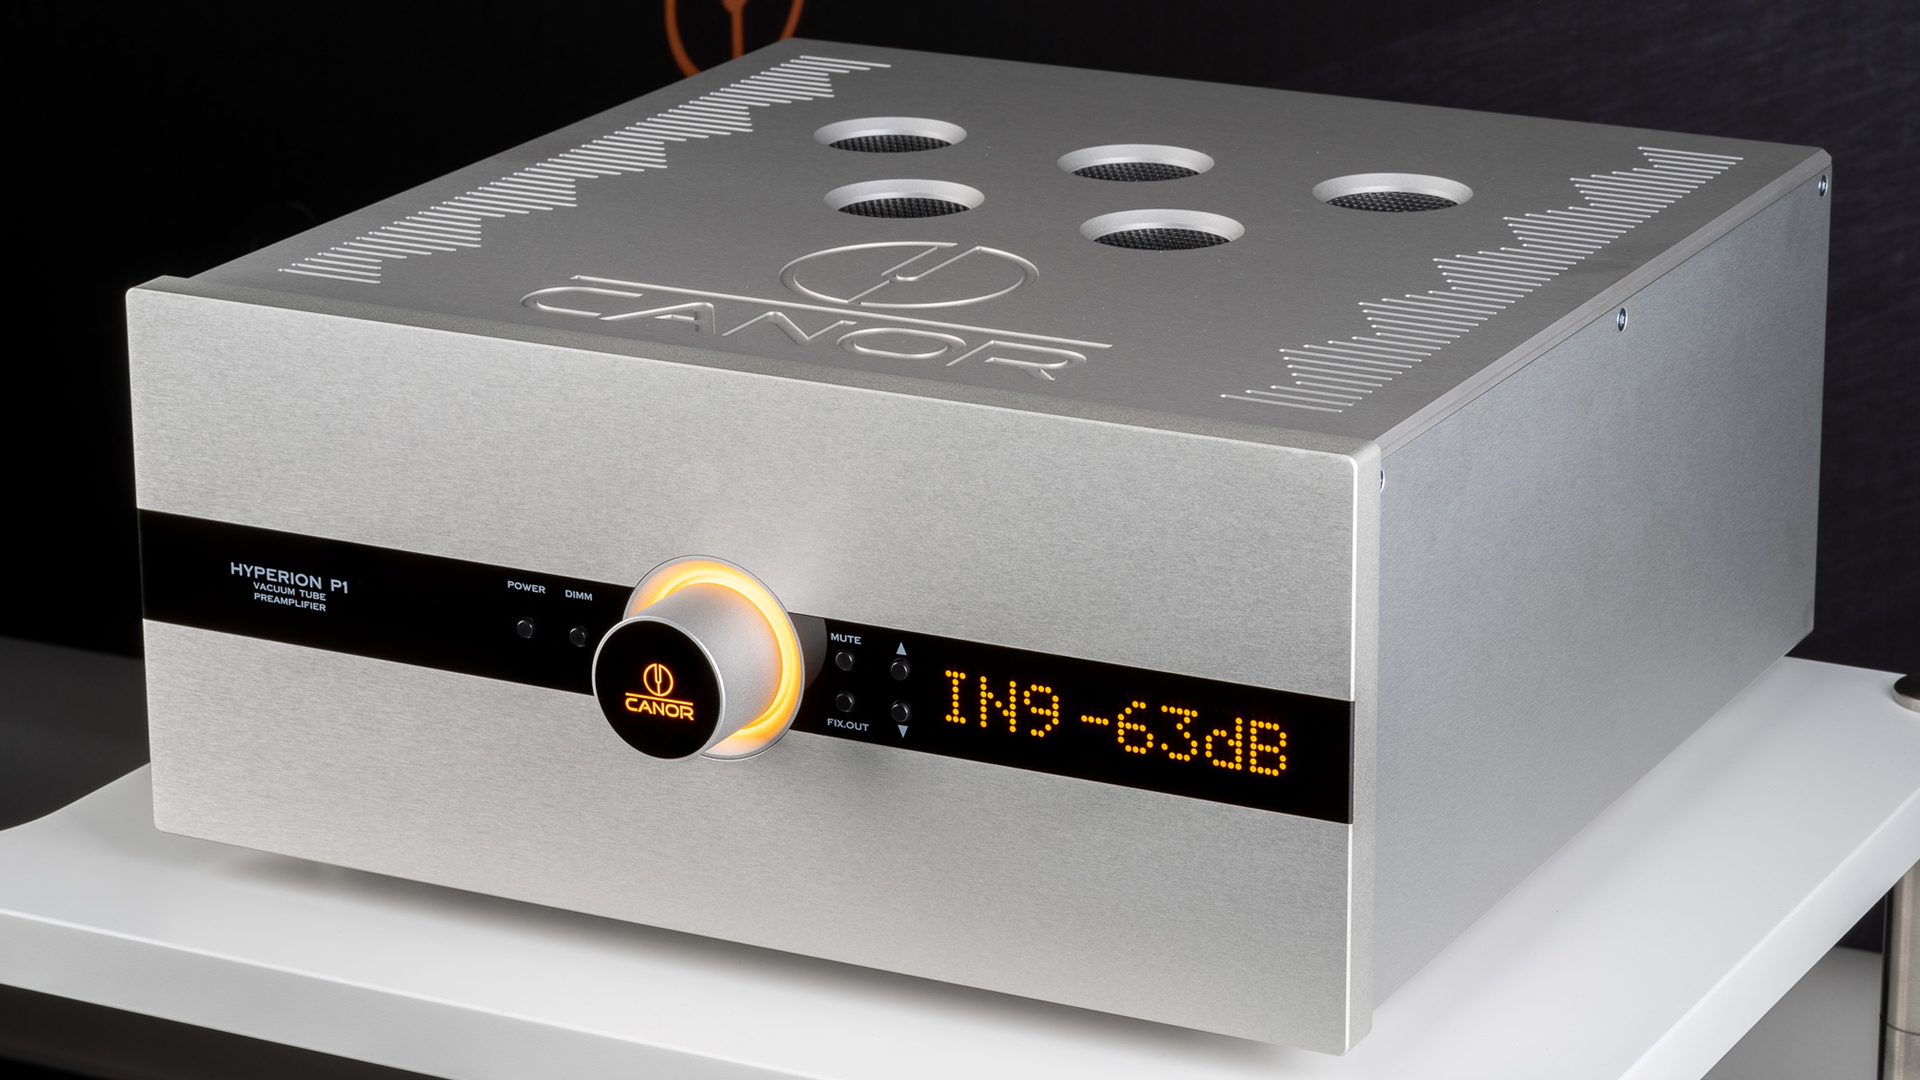 Preamplifier Hyperion P1 from Canor (Image Credit: Canor) 